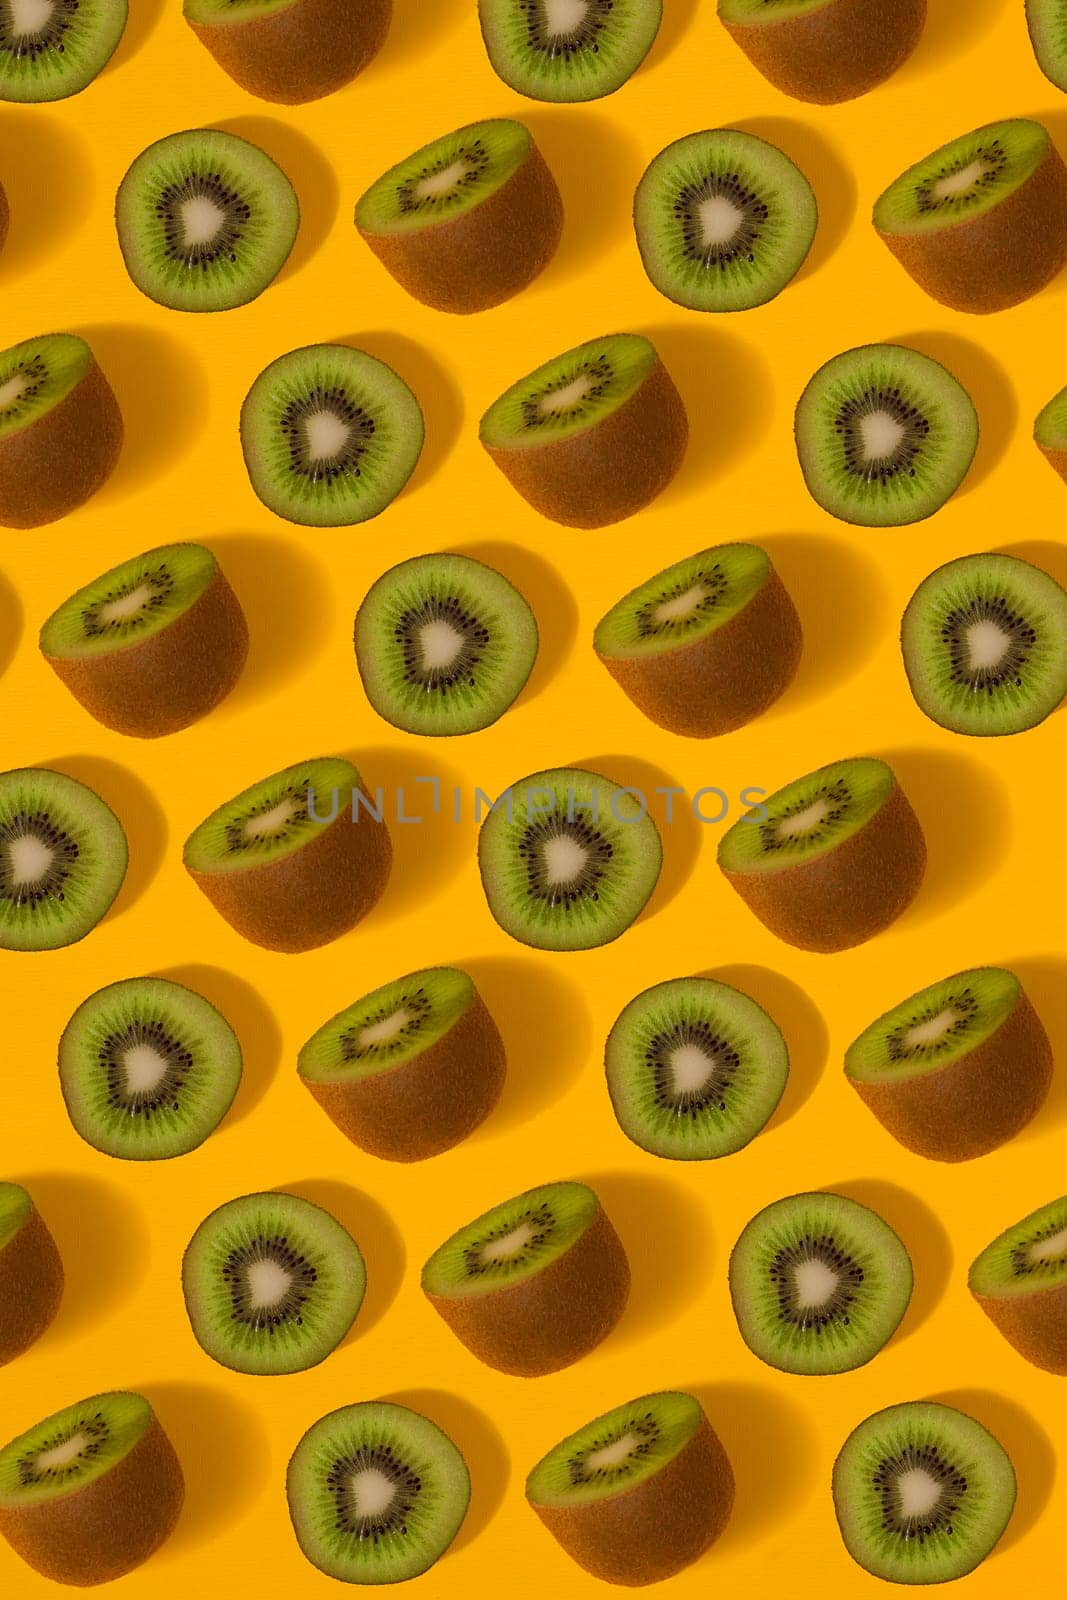 Colorful pattern of kiwi. Top view of the sliced kiwi. Kiwi on a yellow background